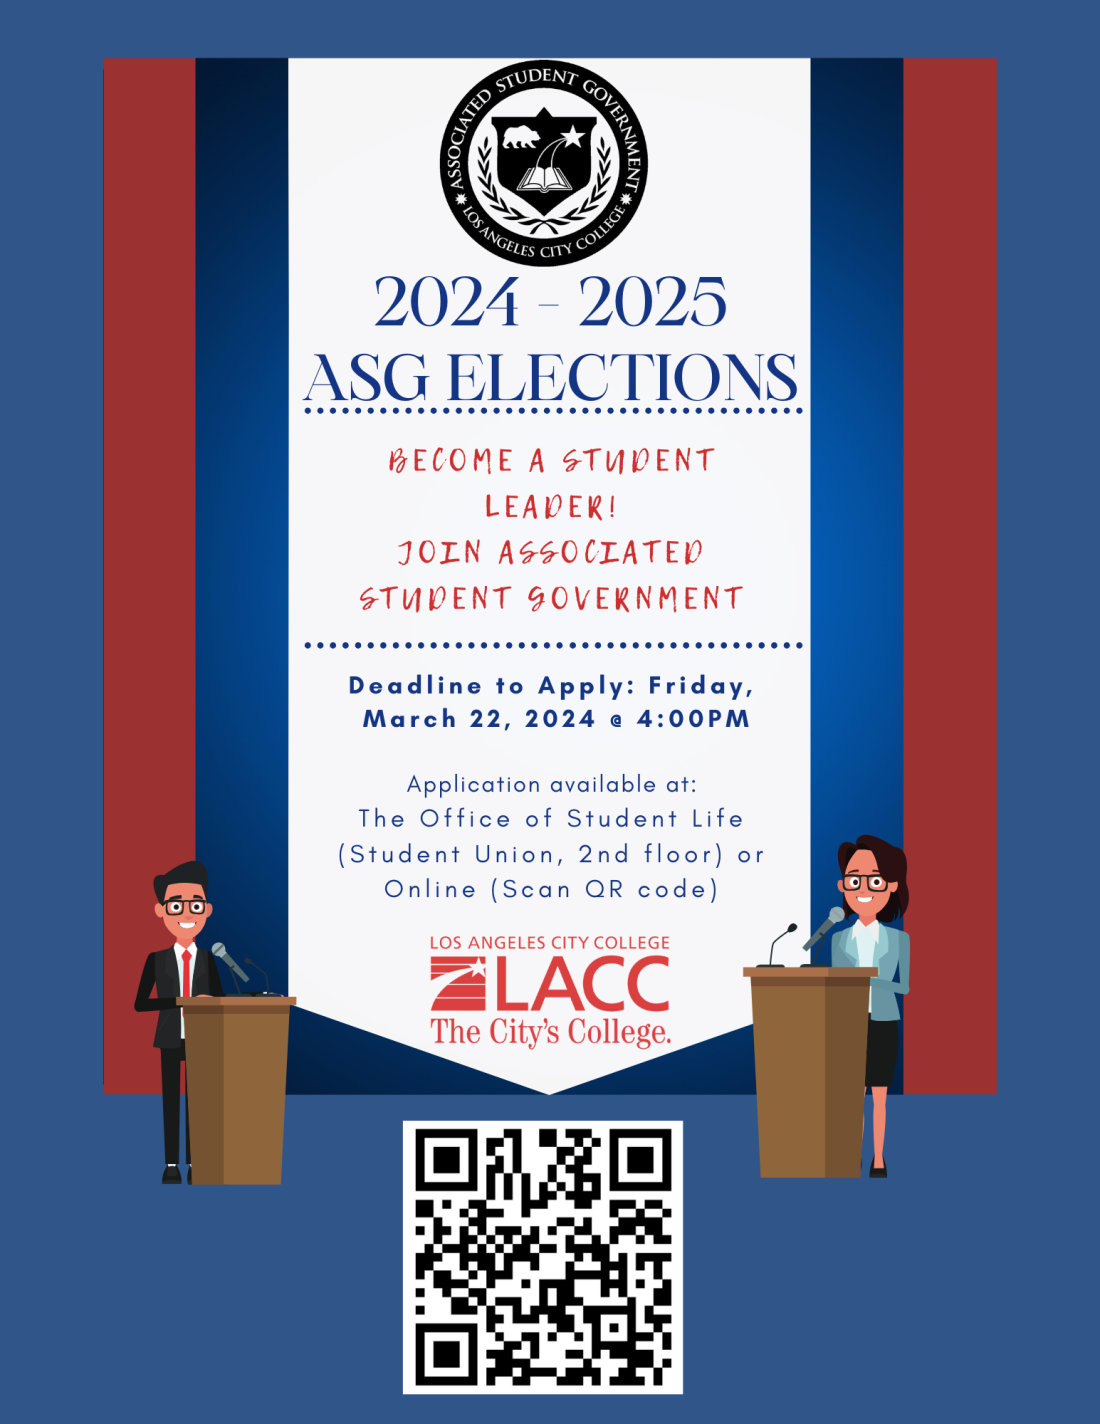 ASG Elections LACC